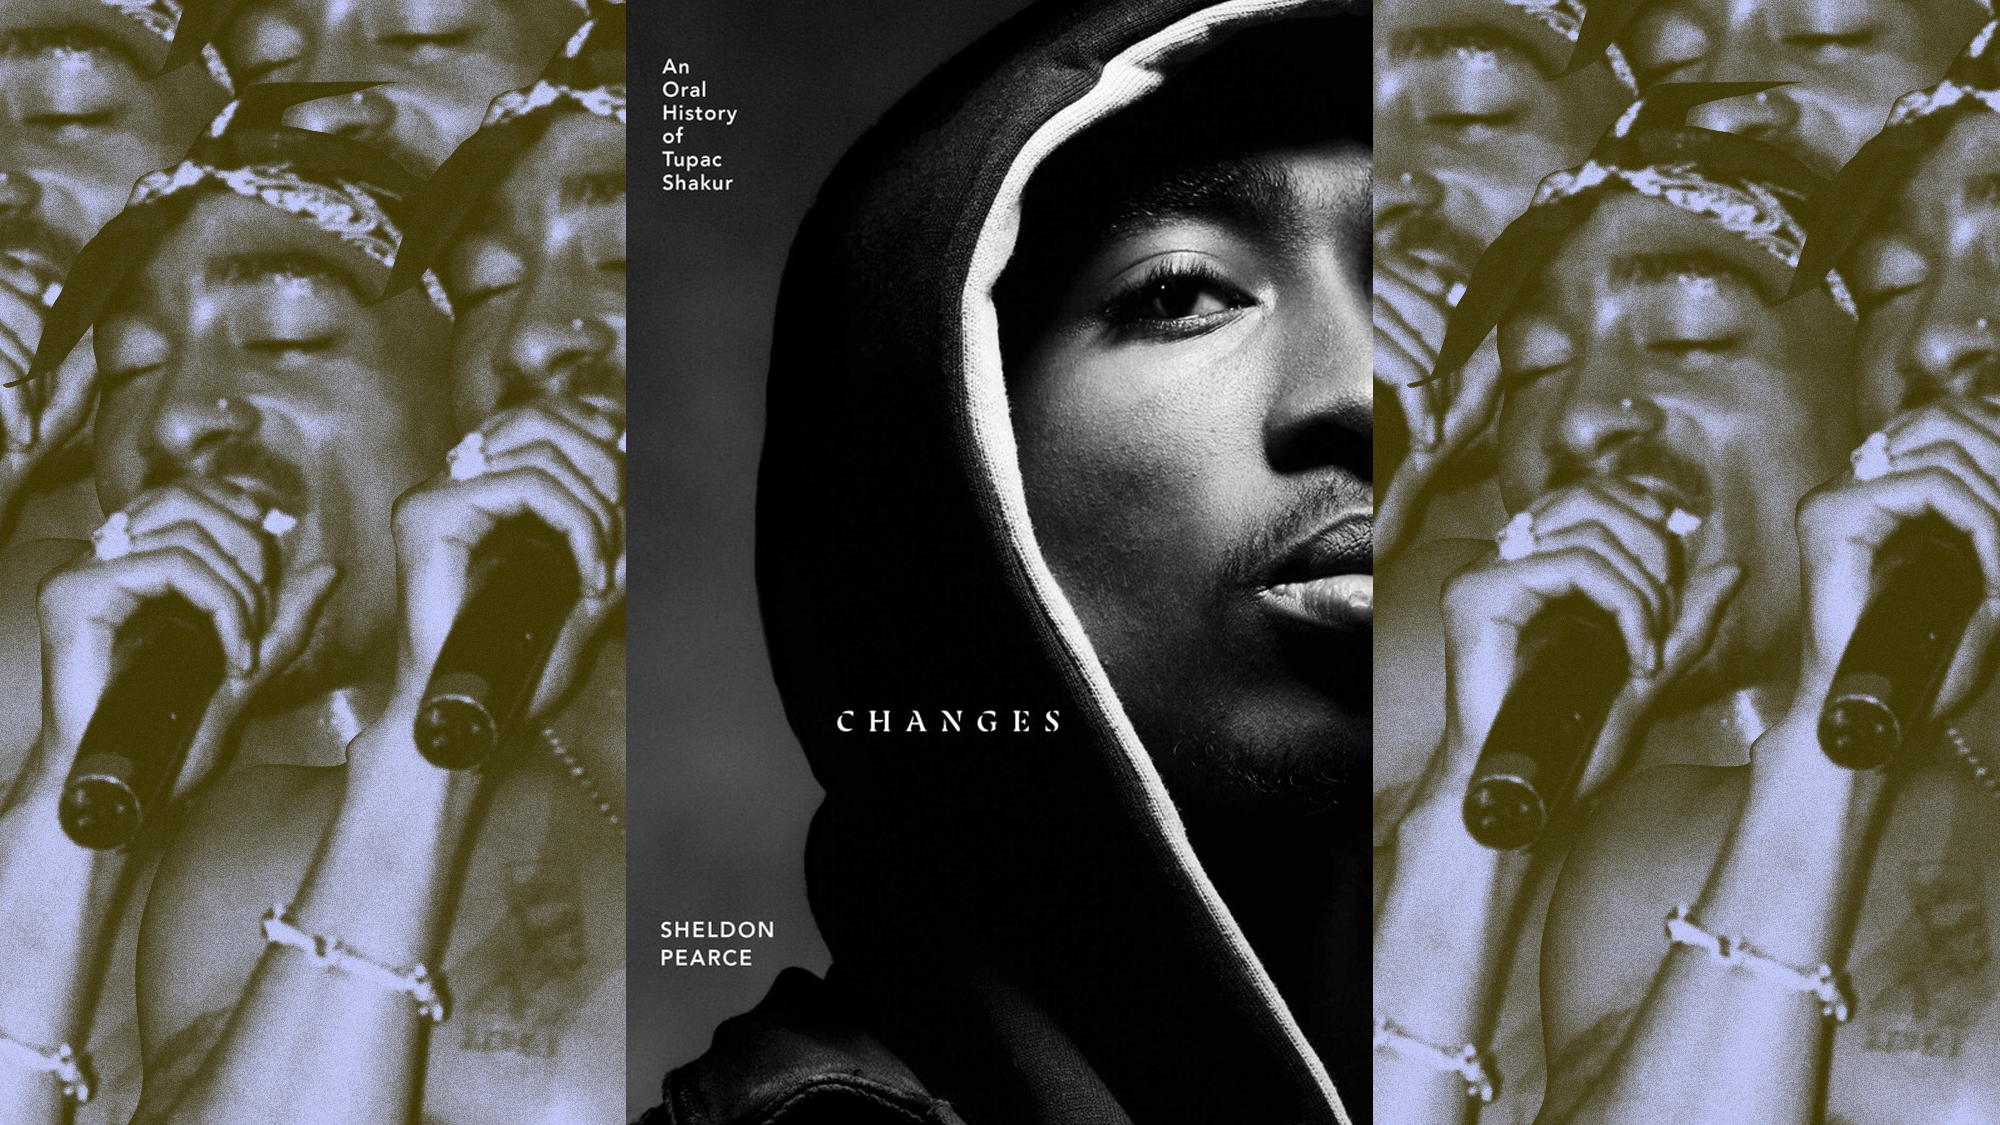 Oral history Changes is a grounded account of Tupac Shakur’s legendary life